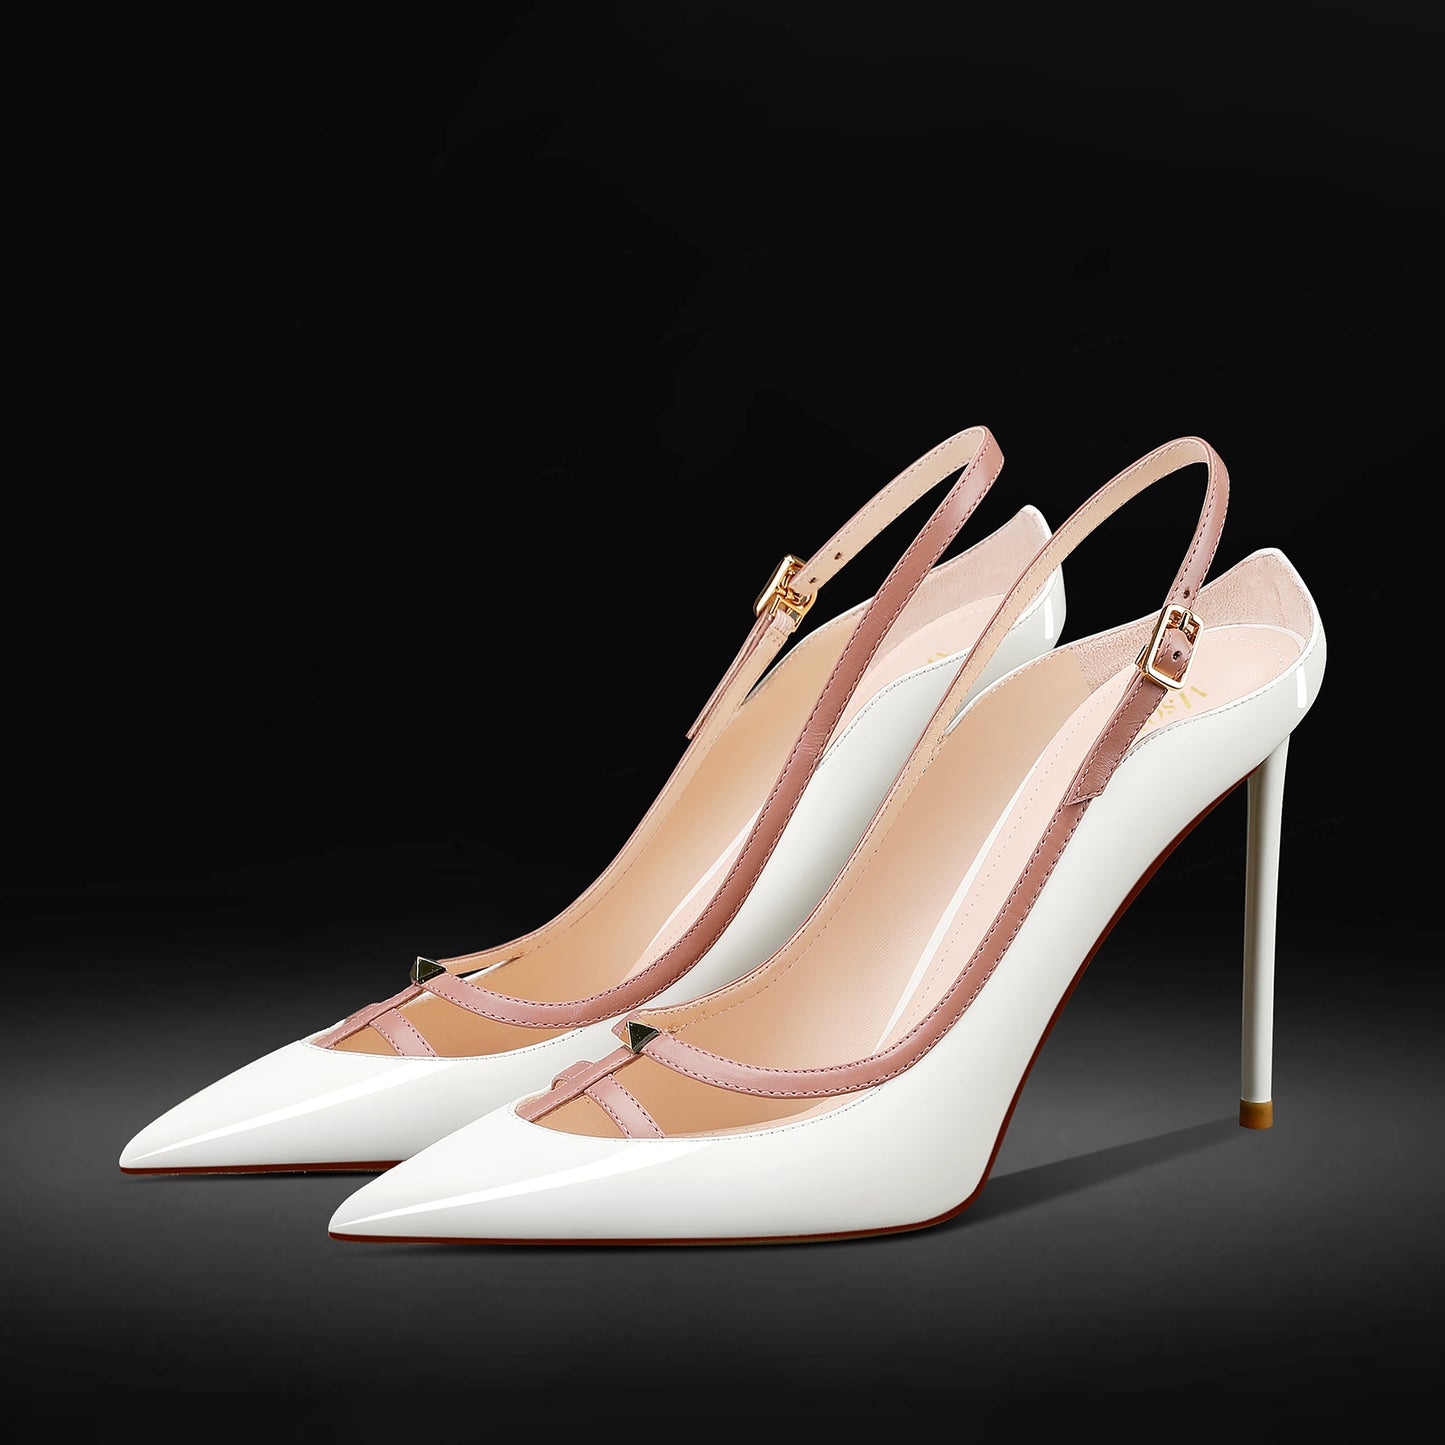 Women's Leather Pointed Toe Stiletto Pumps - High Heels w/Comfortable Ankle Strap & Patent Shine